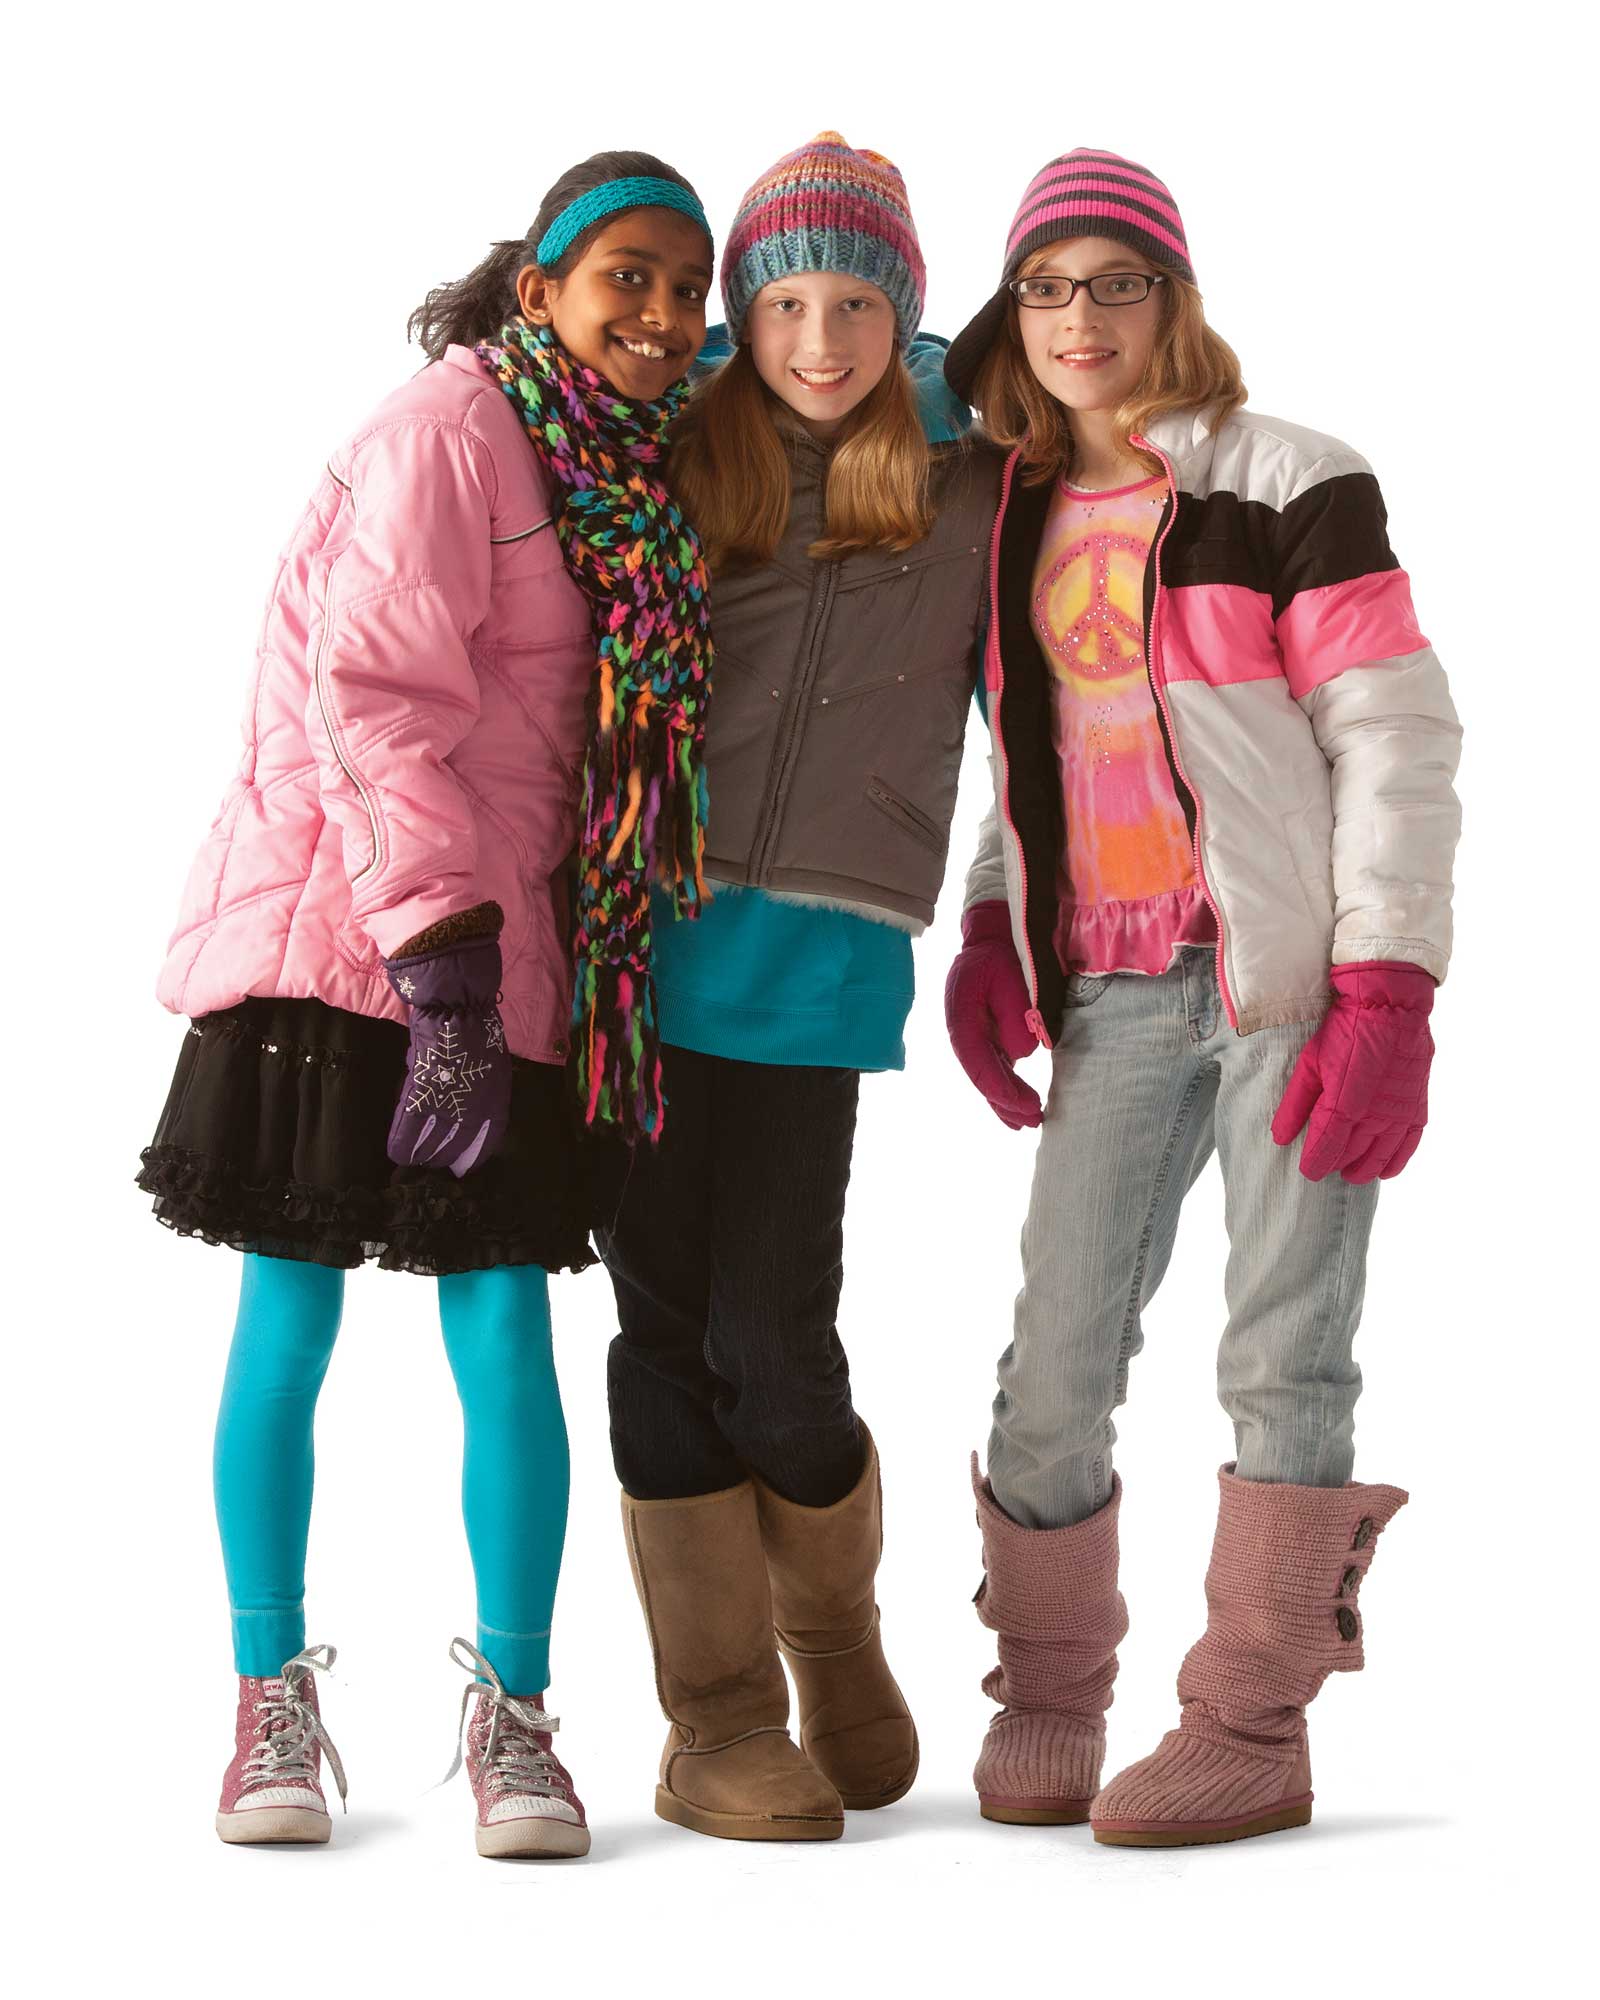 Three girls smiling in winter clothes.